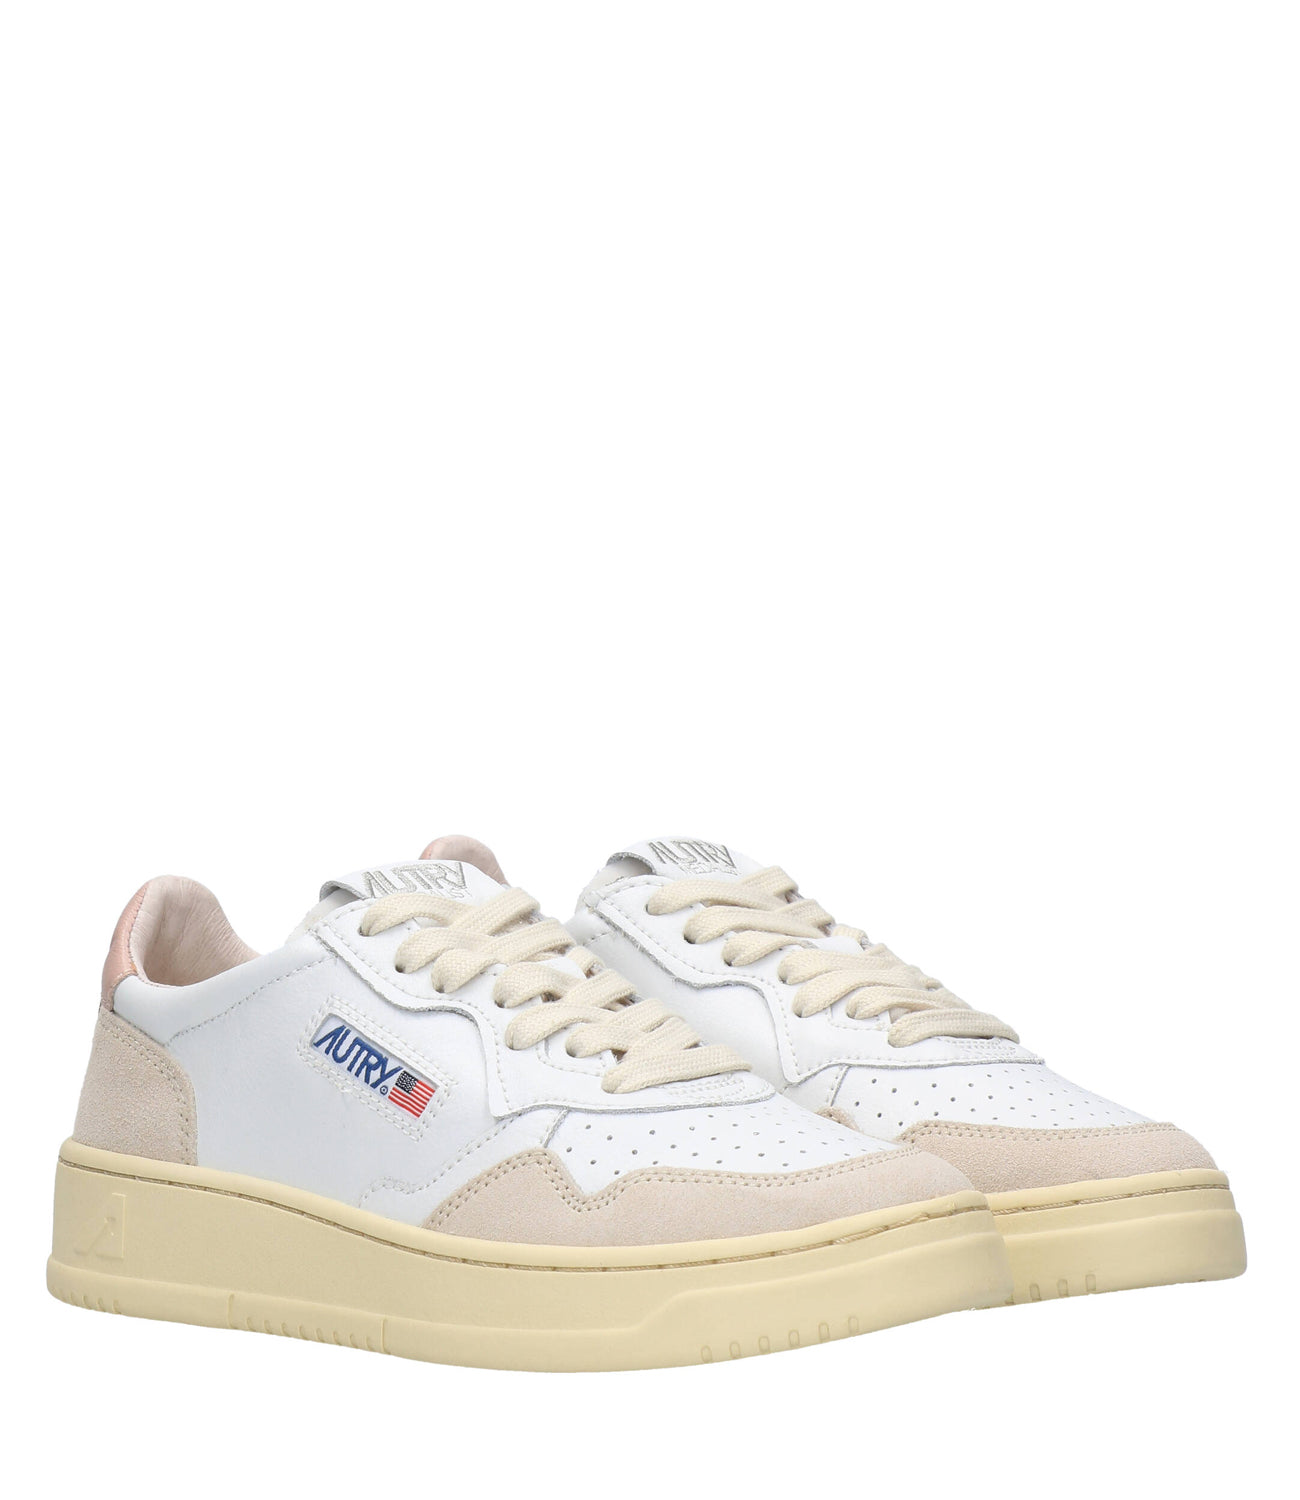 Autry | Medalist Low White and Pink Sneakers